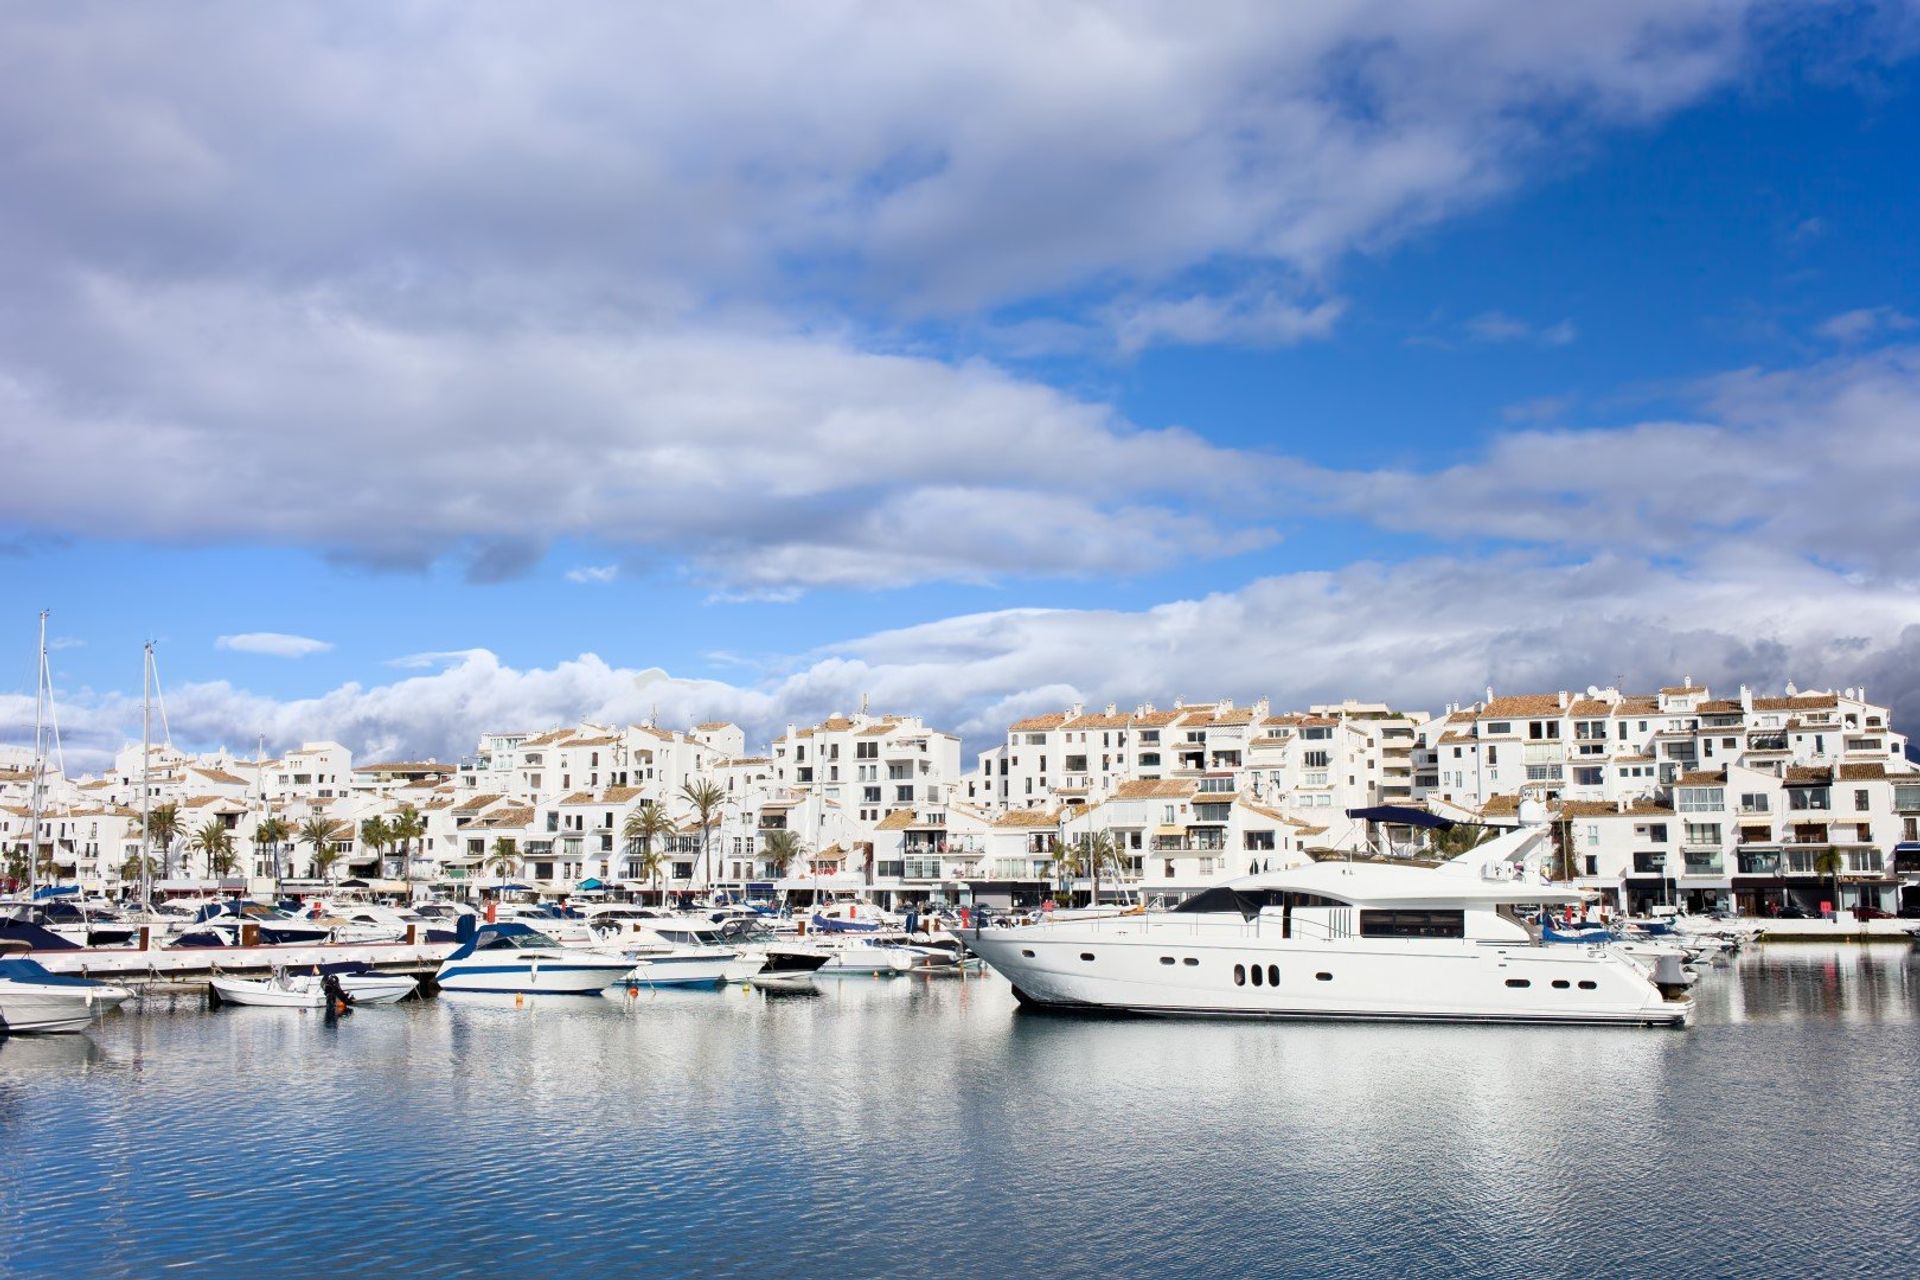 Take an evening walk along Puerto Banus marina dotted with luxury yachts and boats 